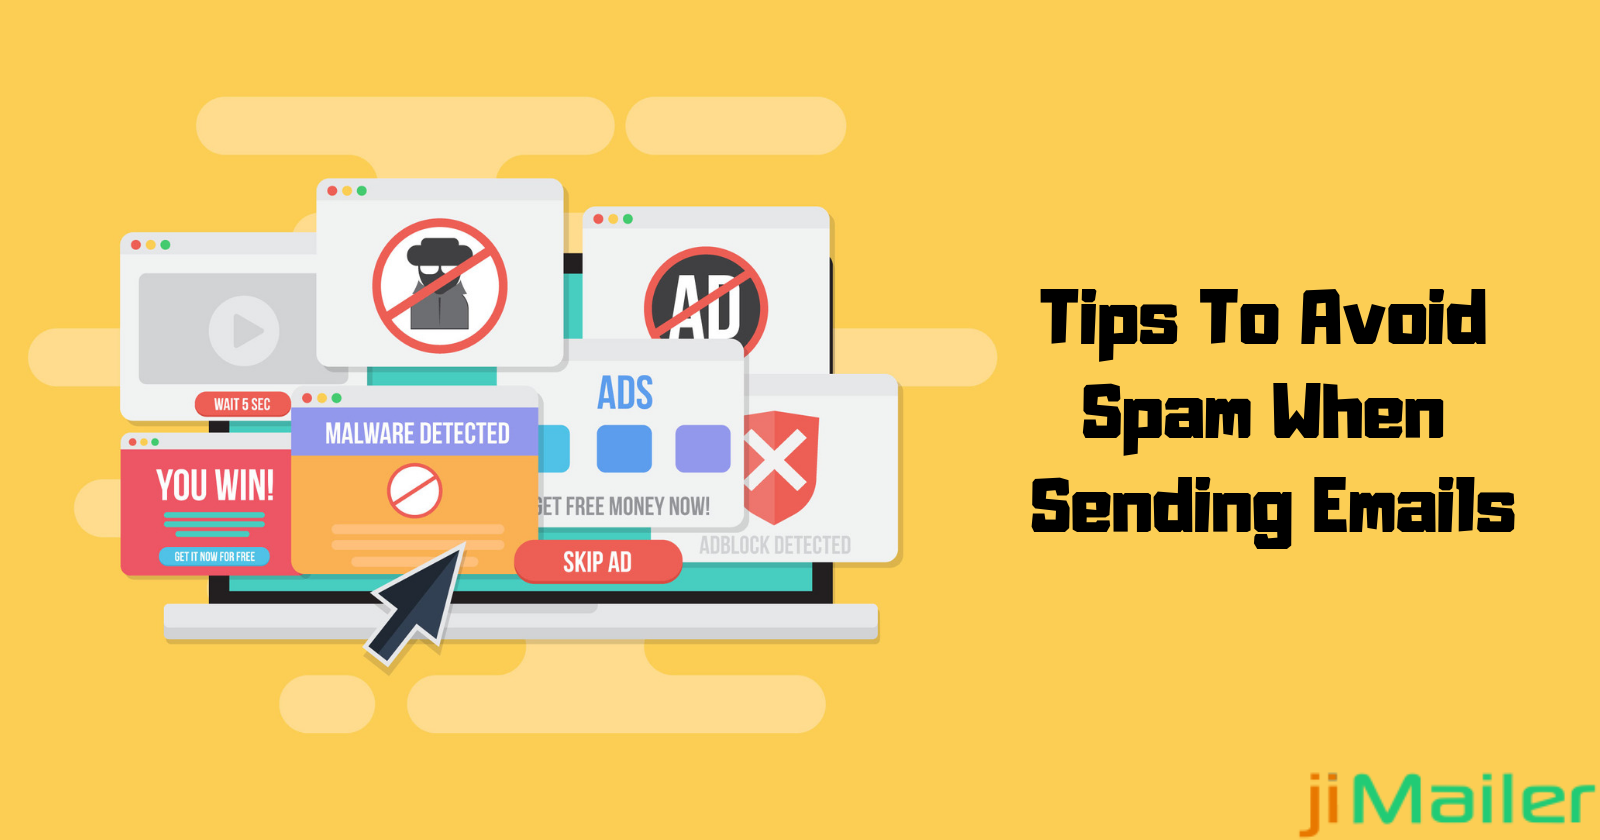 How Can You Prevent Your Mail From Spam Filters?